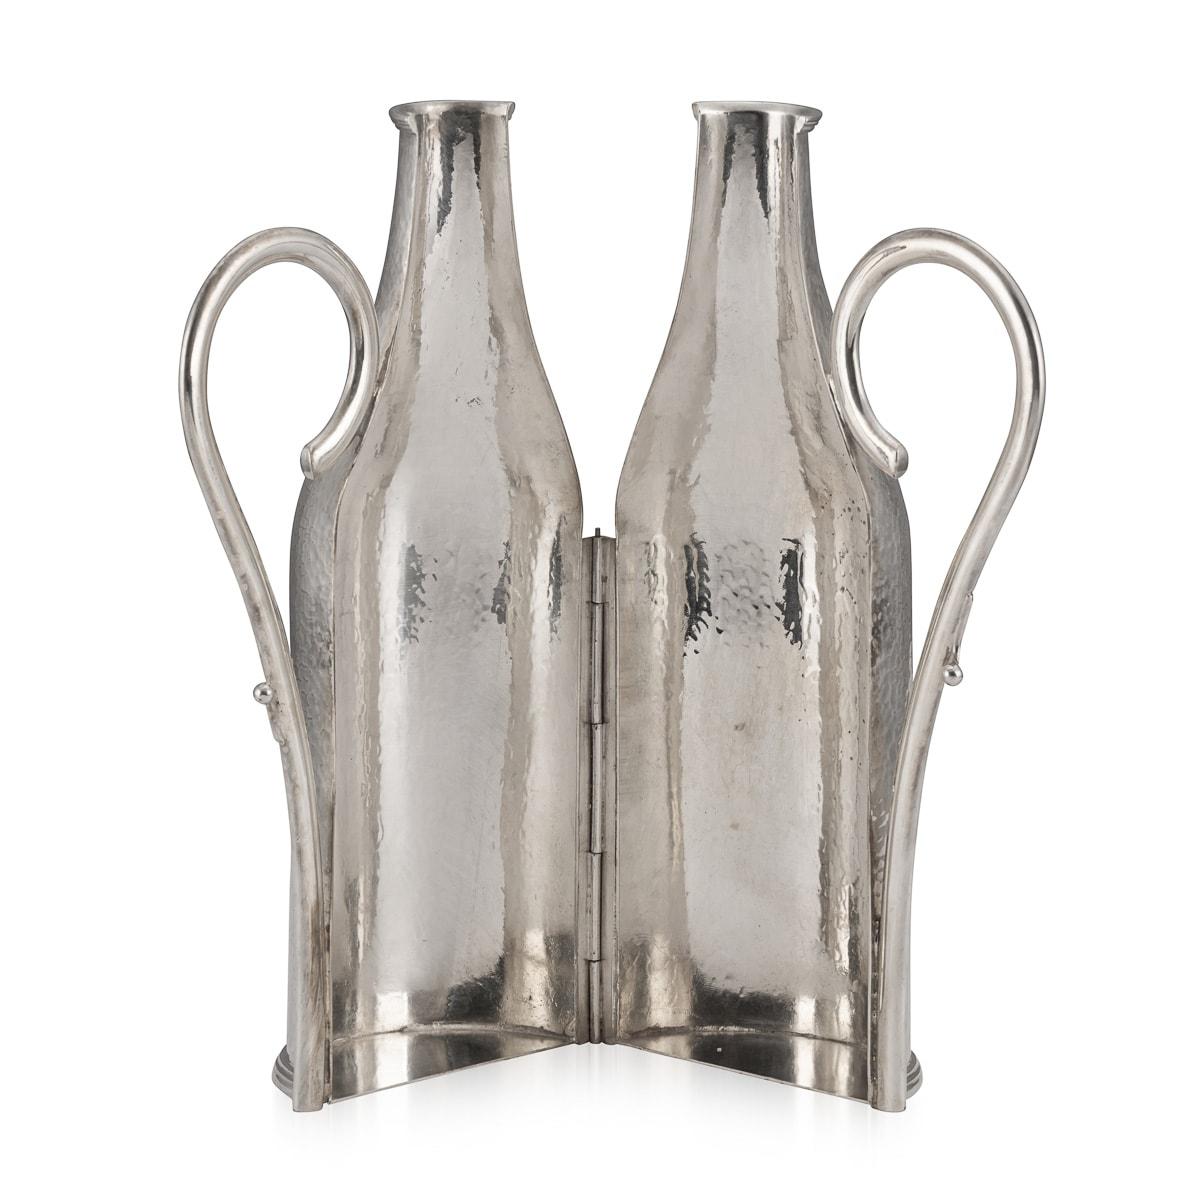 British 20th Century English Silver Plate Bottle Holder By Mappin & Webb, c.1930 For Sale